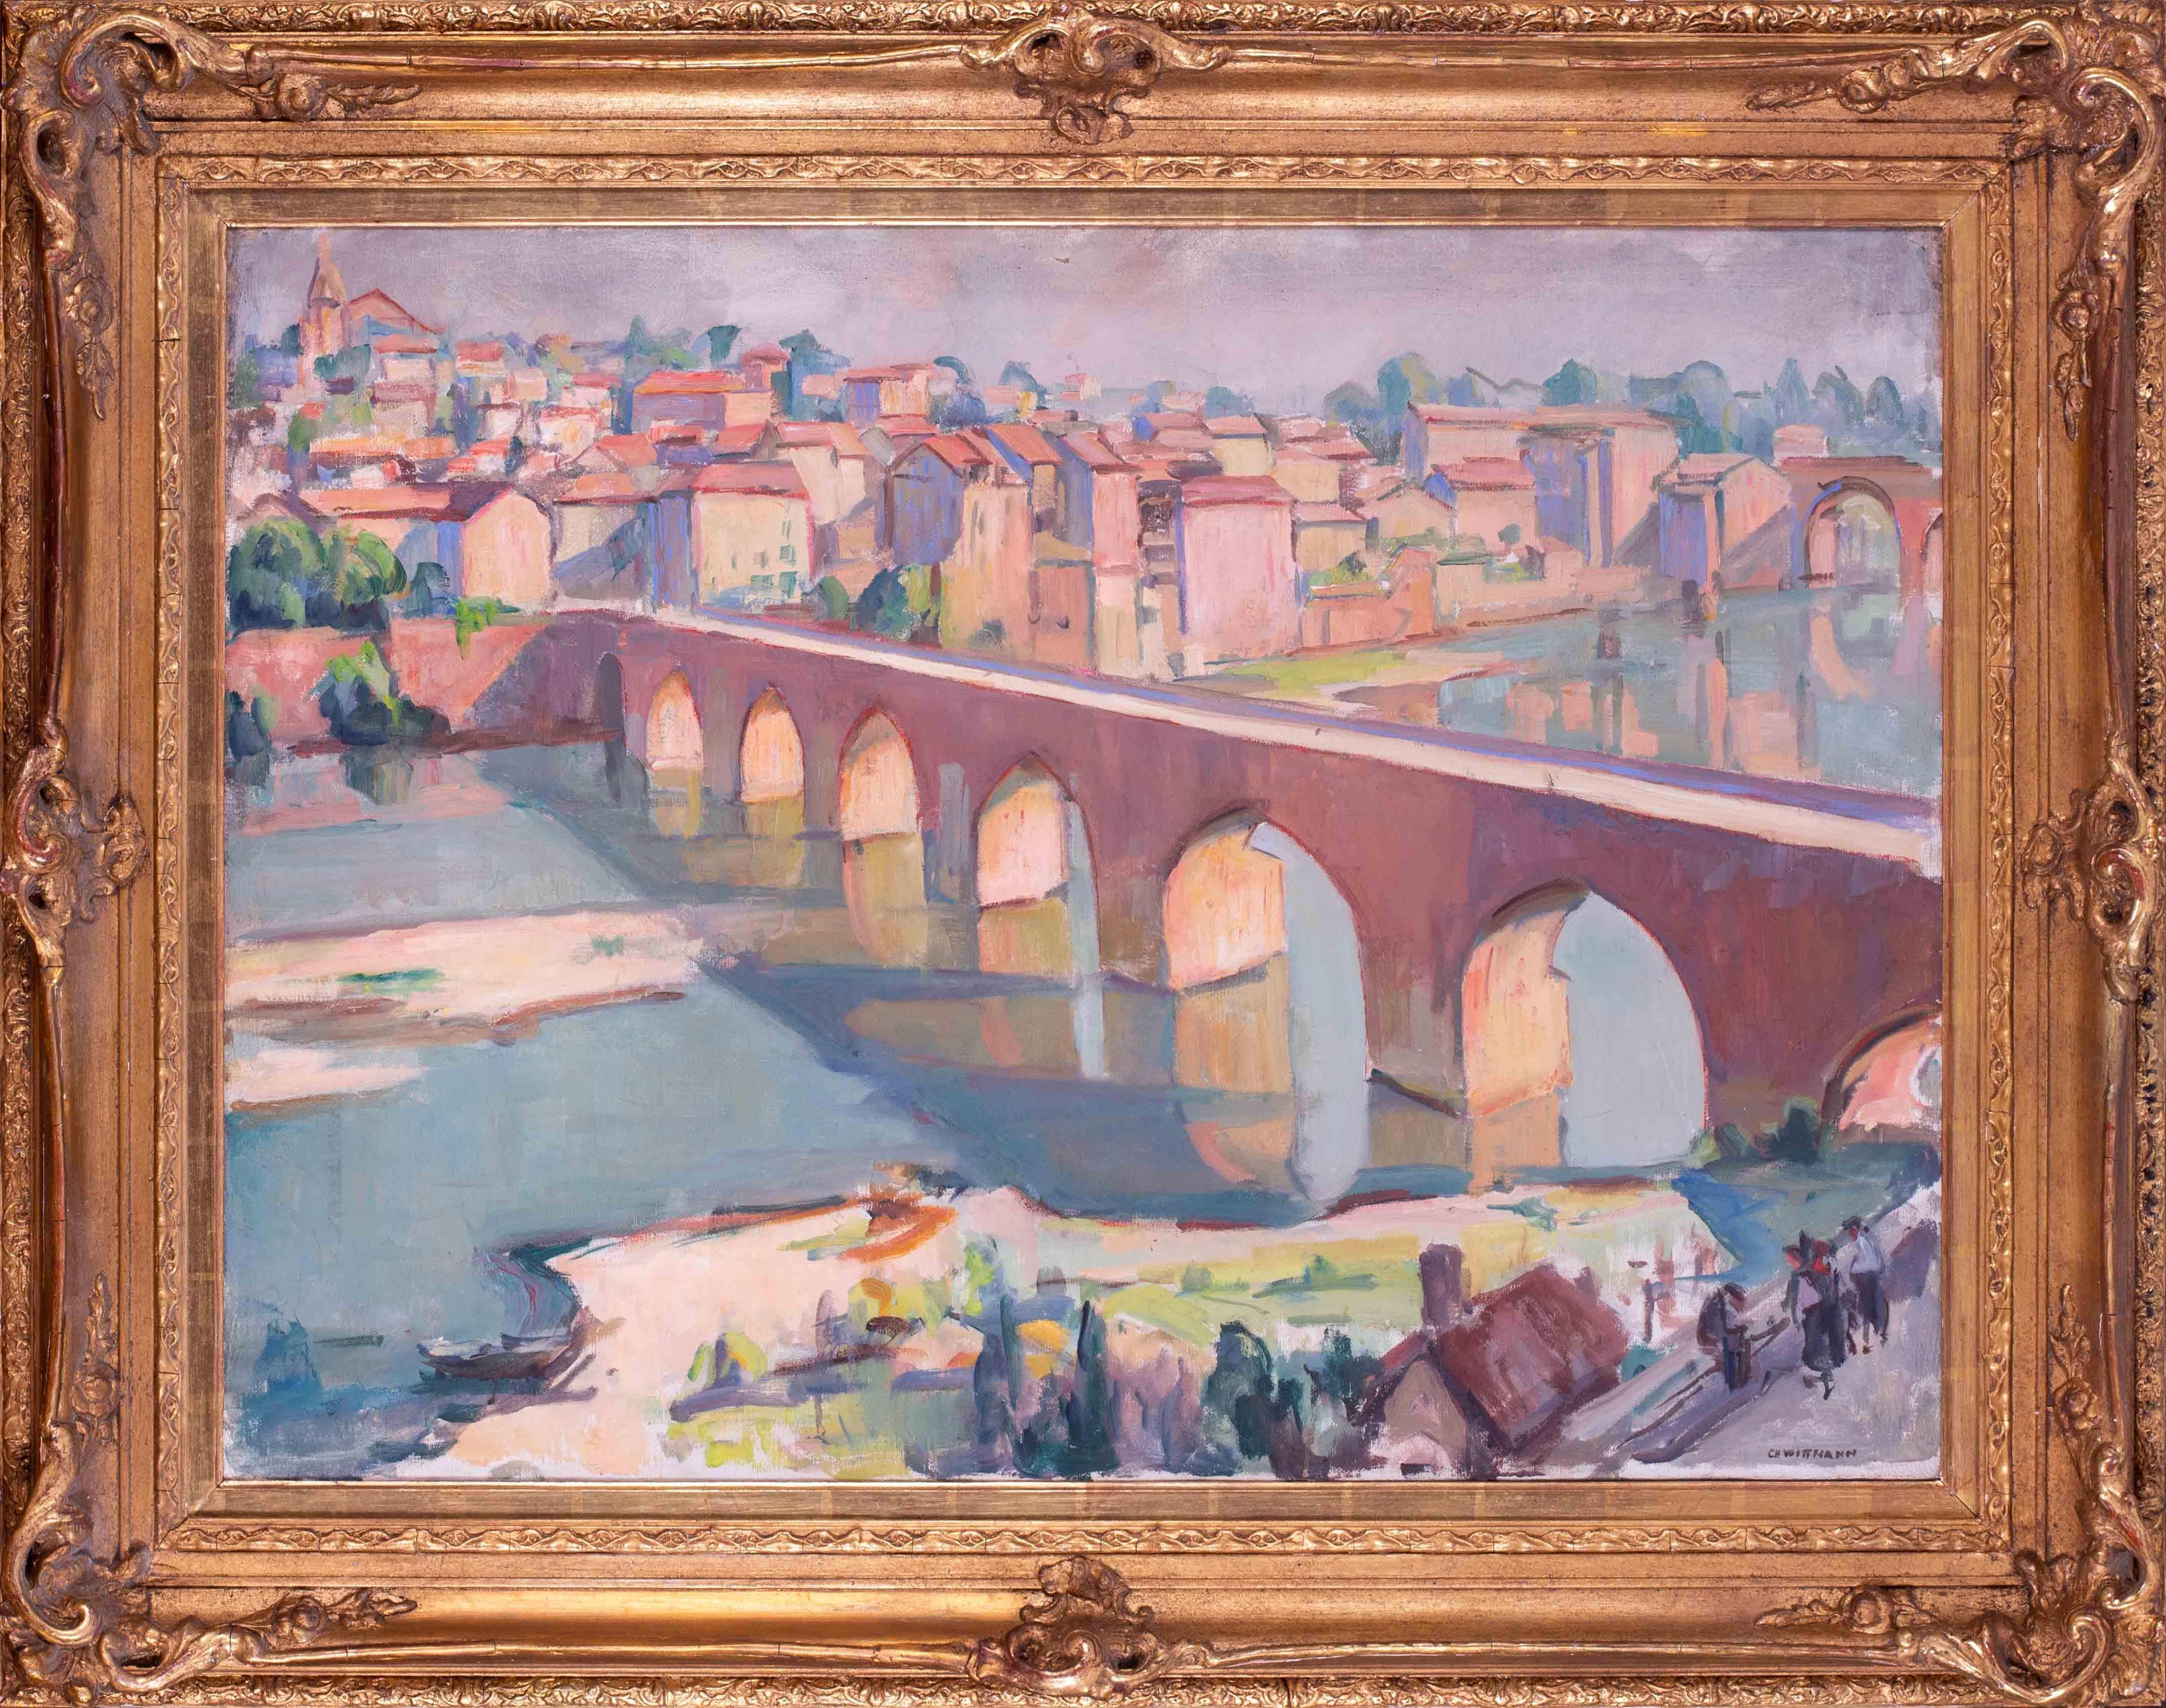 Charles Wittmann Landscape Painting - Post impressionist large summer oil painting of the Old Bridge at Albi, France